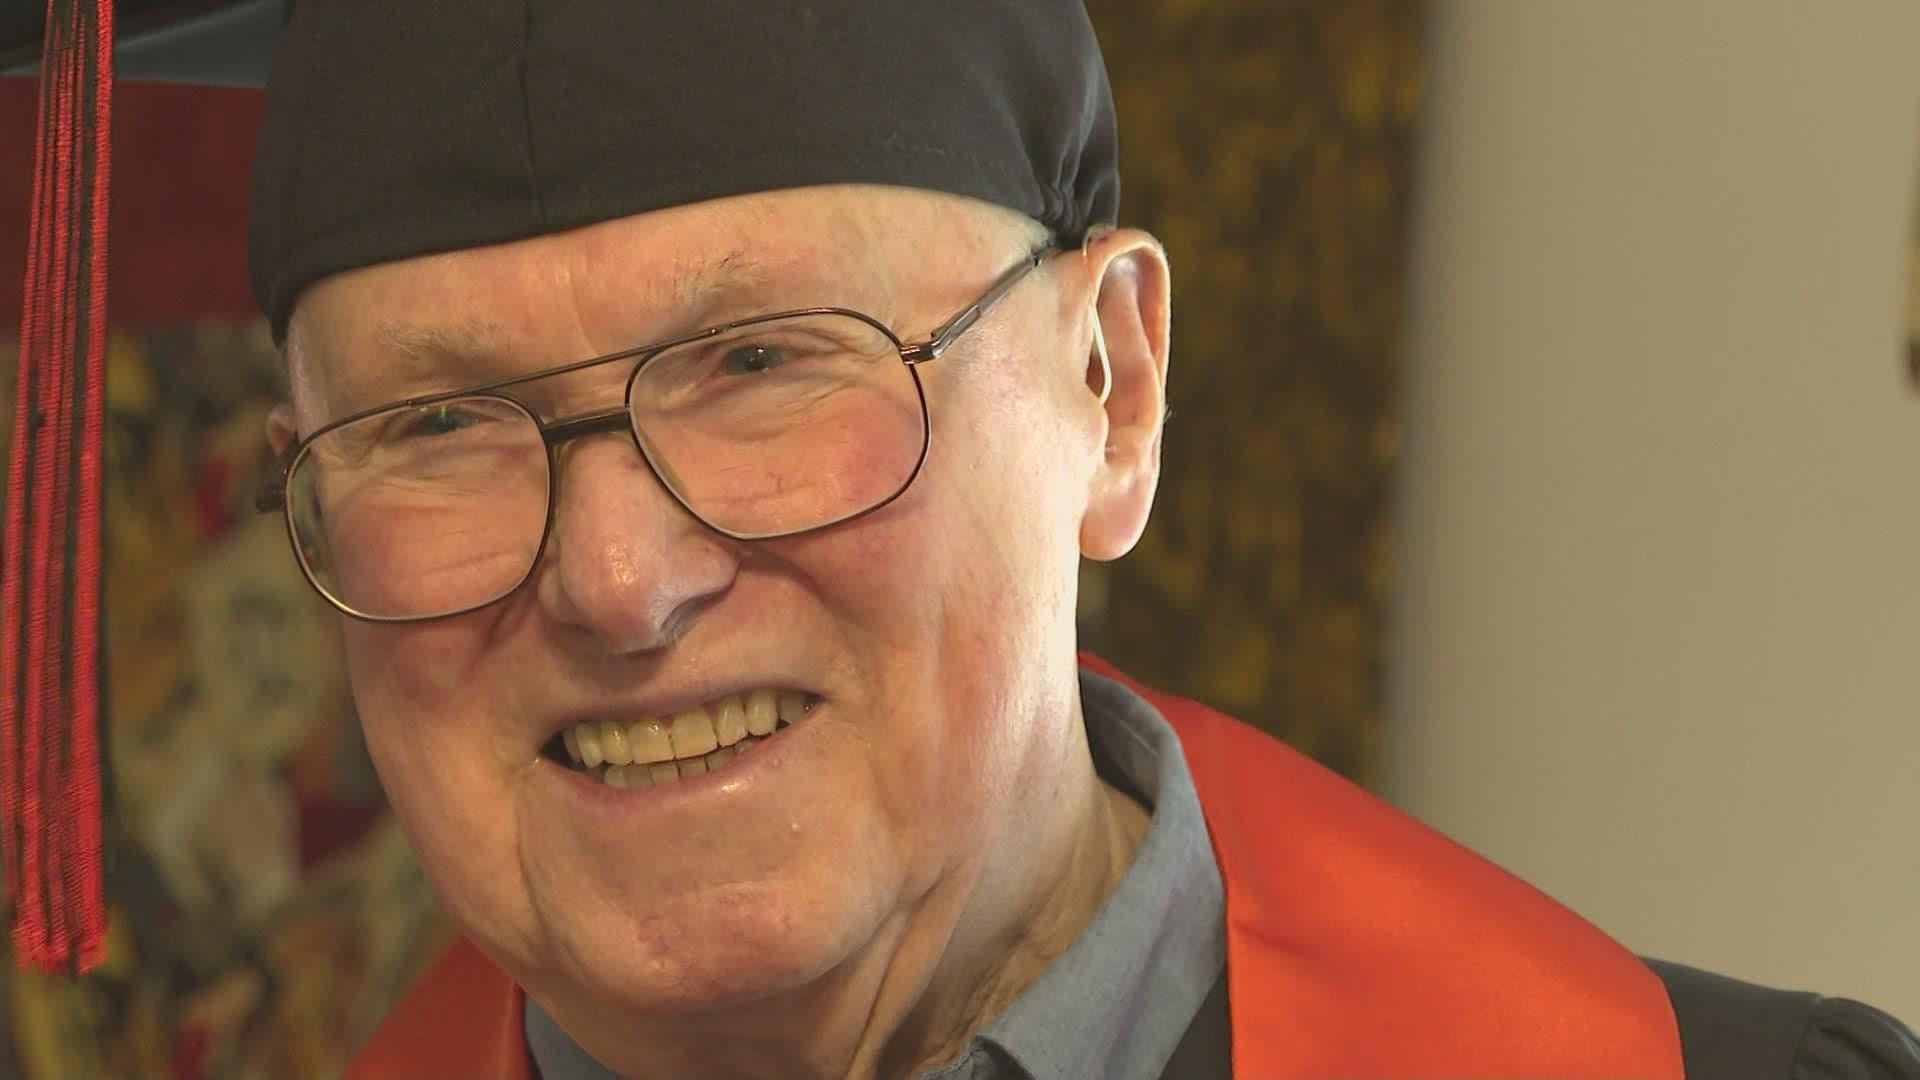 Bill Henshaw, who left high school in October of 1949, finally graduates with his diploma 72 years later.